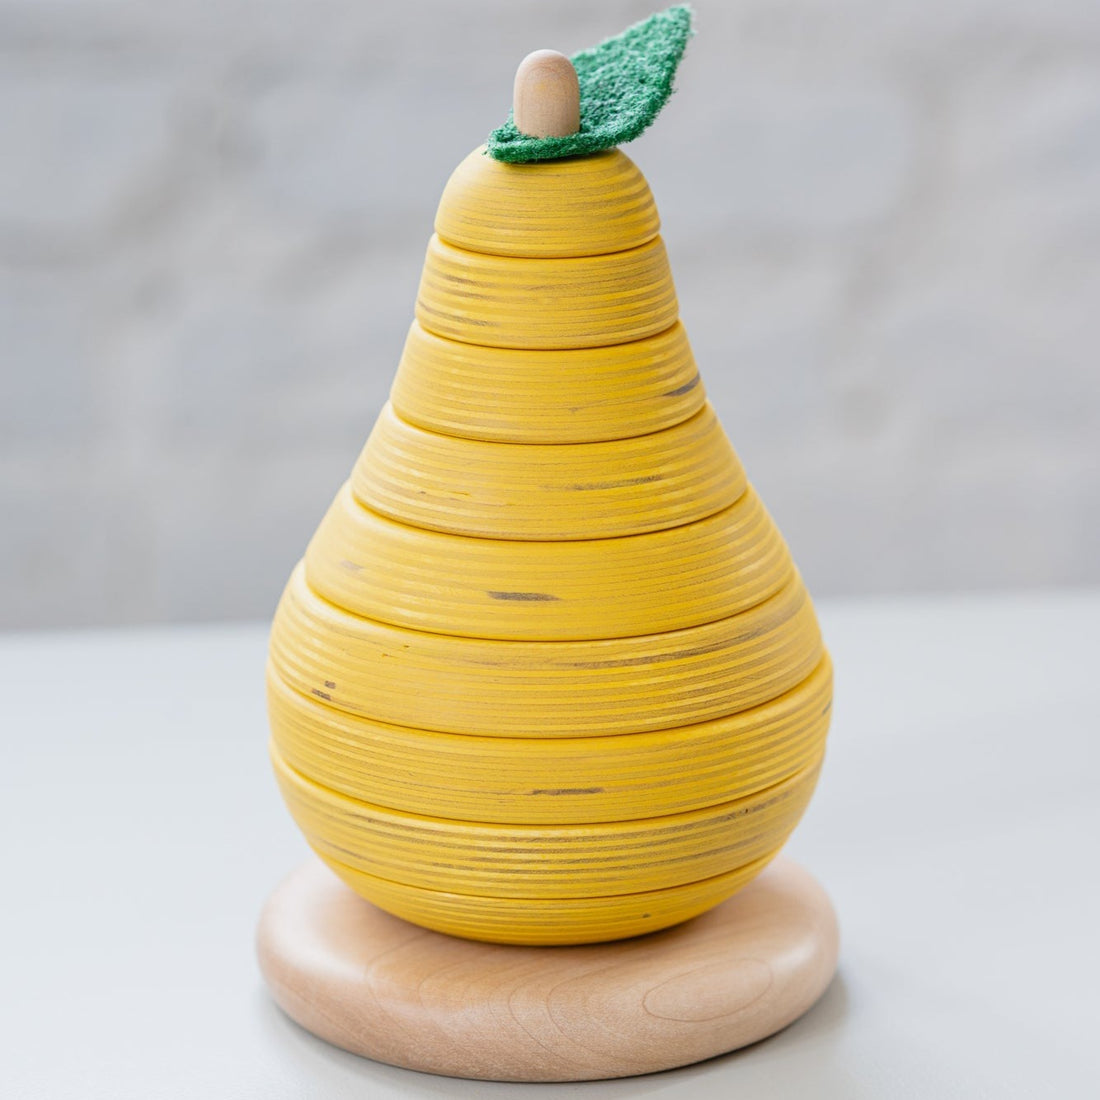 Wooden Stacking Fruit - Pear - MIDMINI - Plywood Furniture